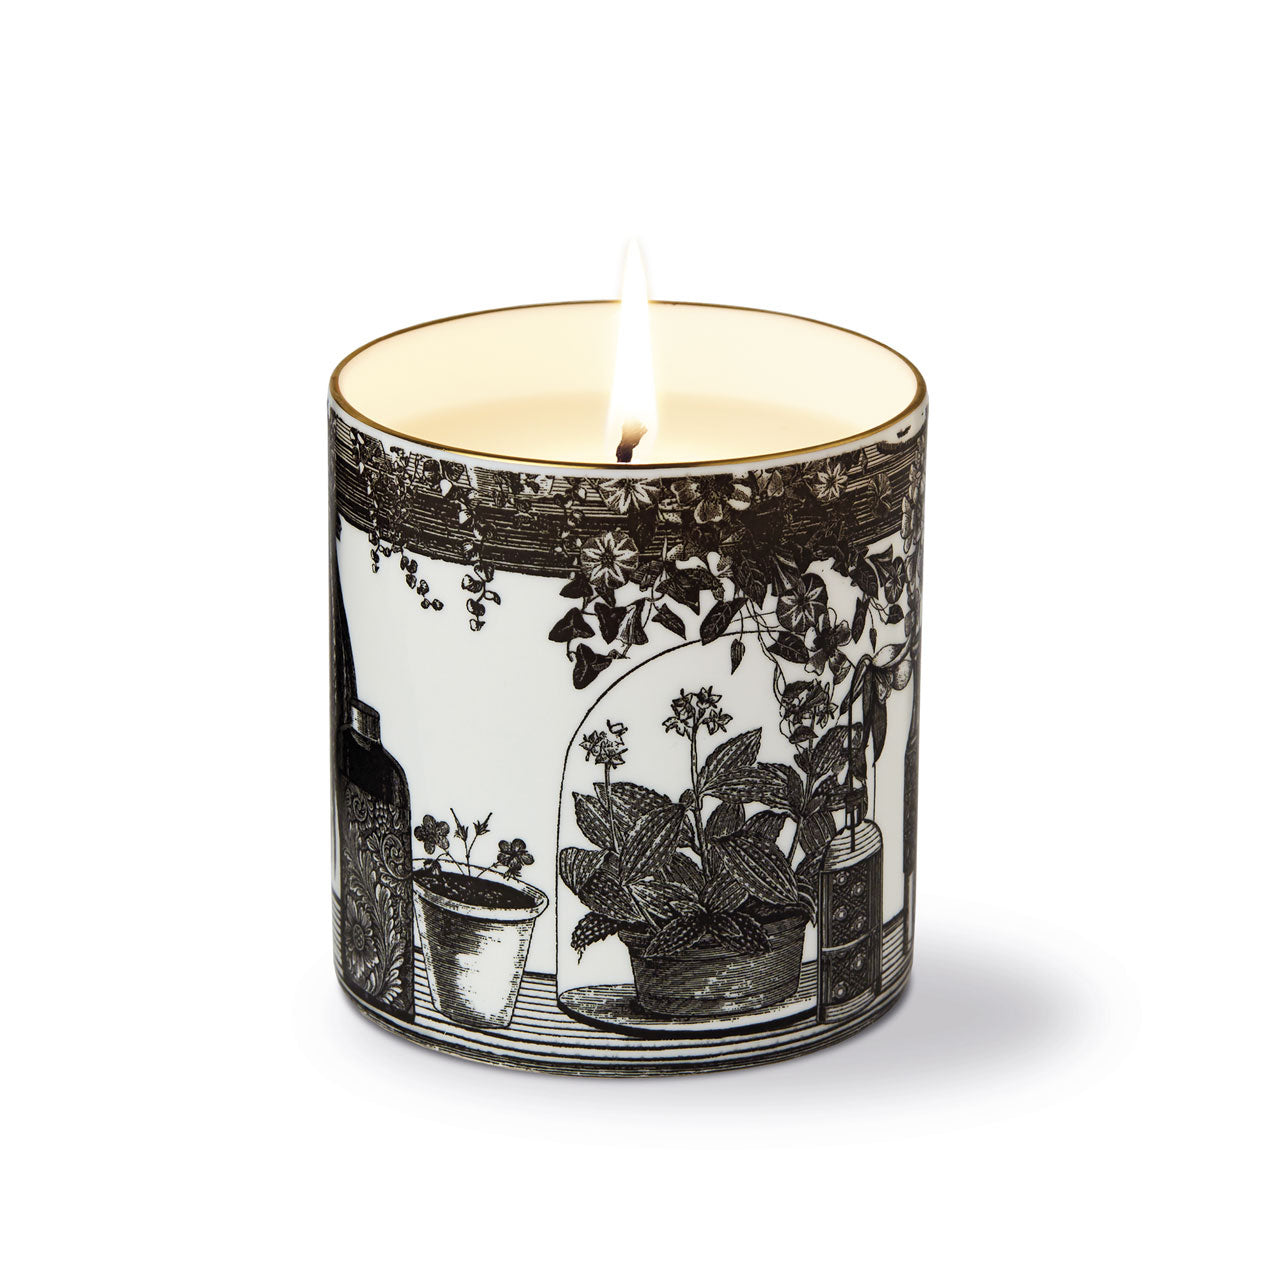 The Gardener's Candle Duo